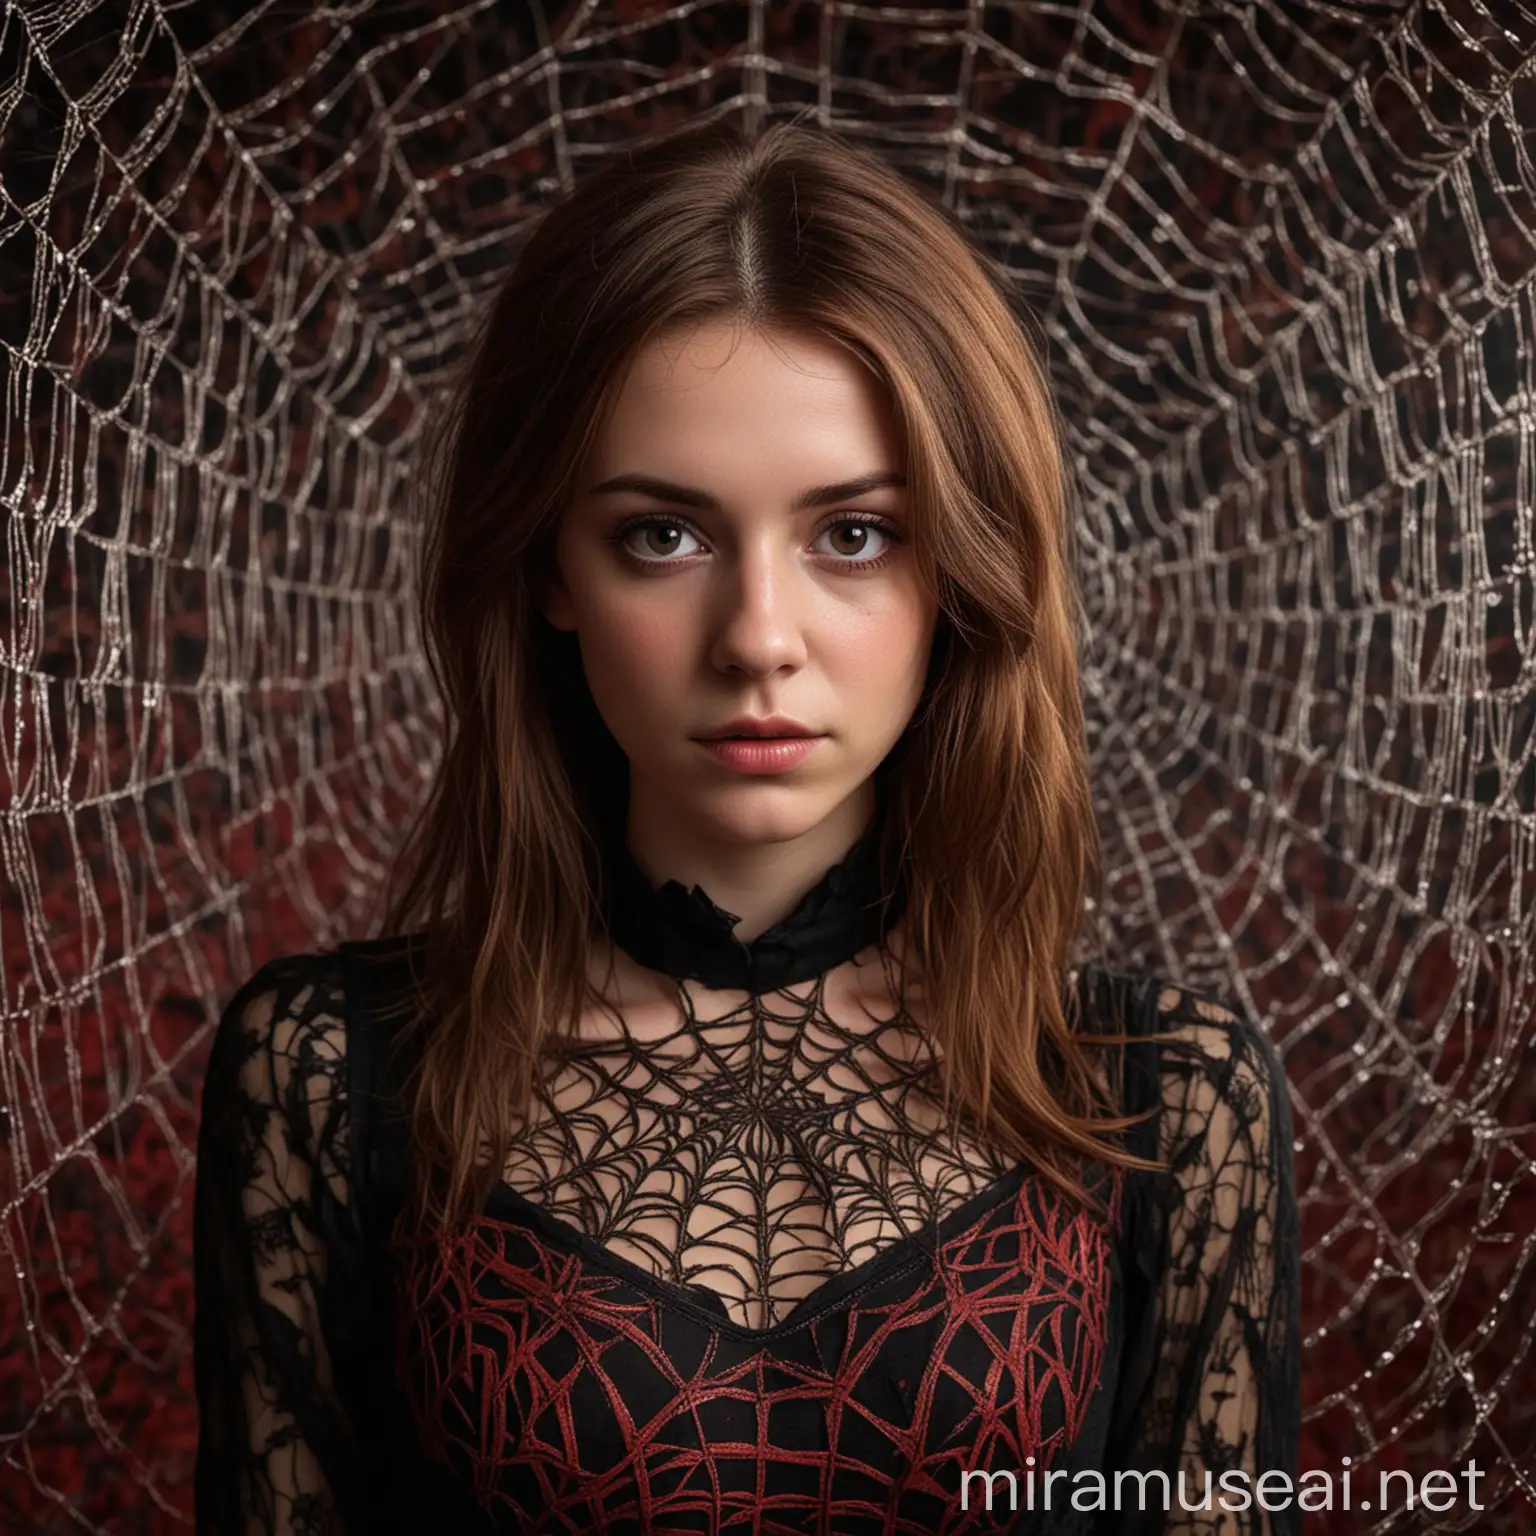 Mysterious Woman in Intricate Black Dress with Spider Web Background